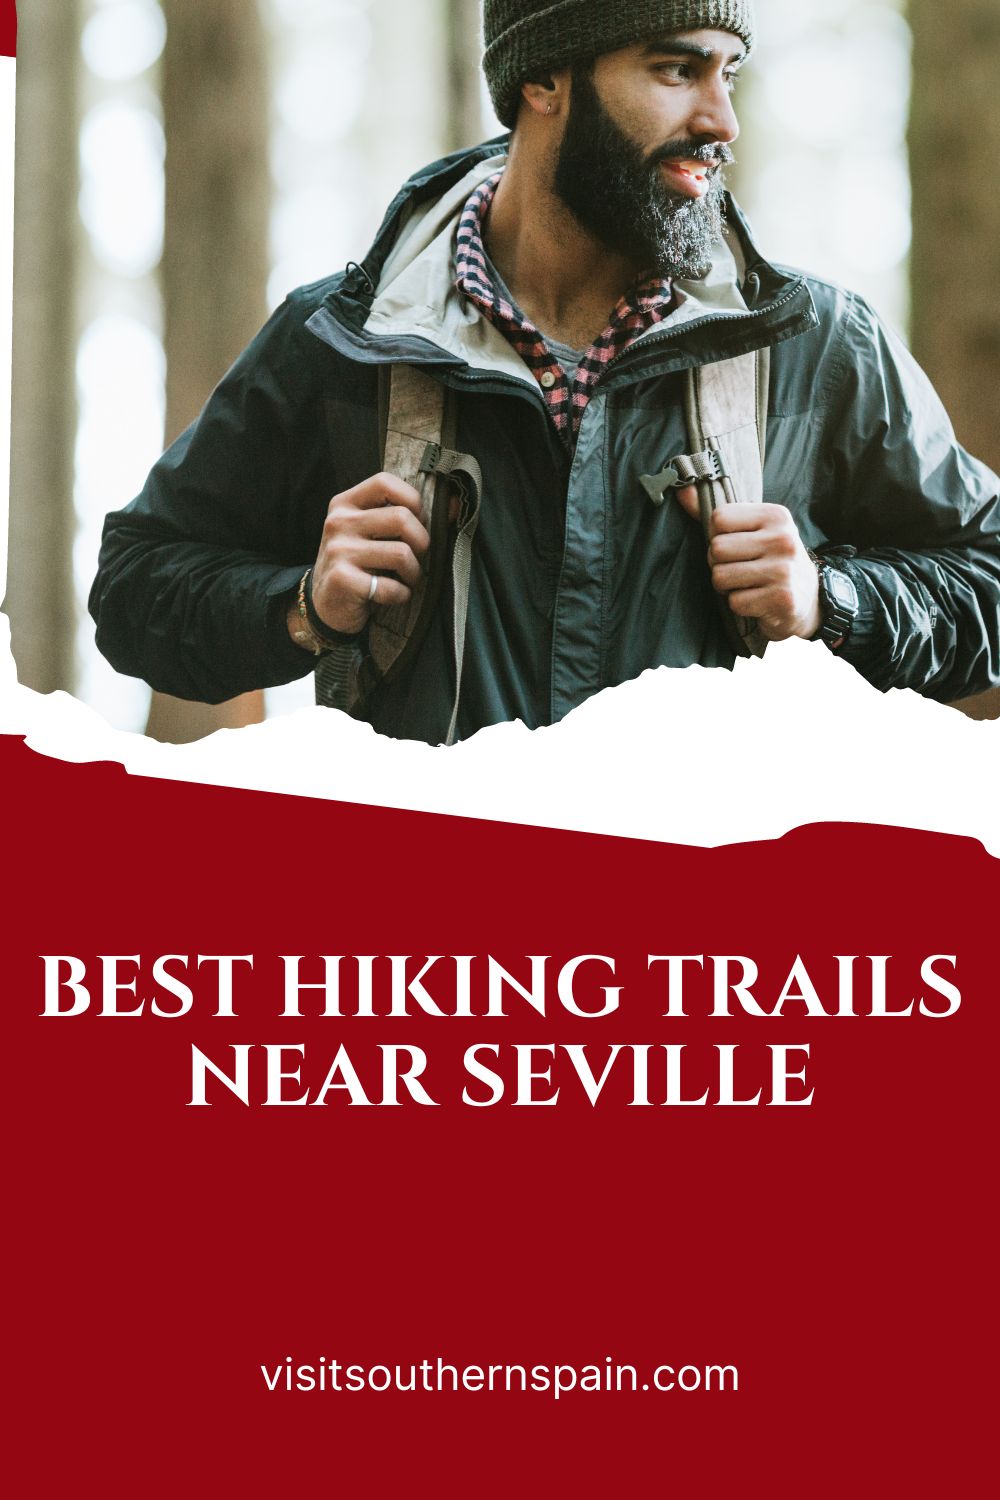 Are you looking for the best hiking trails near Seville? Seville has some of the best places to hike, from easy ones to some more advanced. Marvel at the natural wonders of Andalucia, beautiful mountains, famous trails such as Camino de Santiago and Caminito del Rey, and some top trails you can only find in Spain. With our guide, you don't need to worry about anything, as we help you prepare for the best hiking trails near Seville as well. #hikingtrailsnearseville #hiking #seville #andalucia